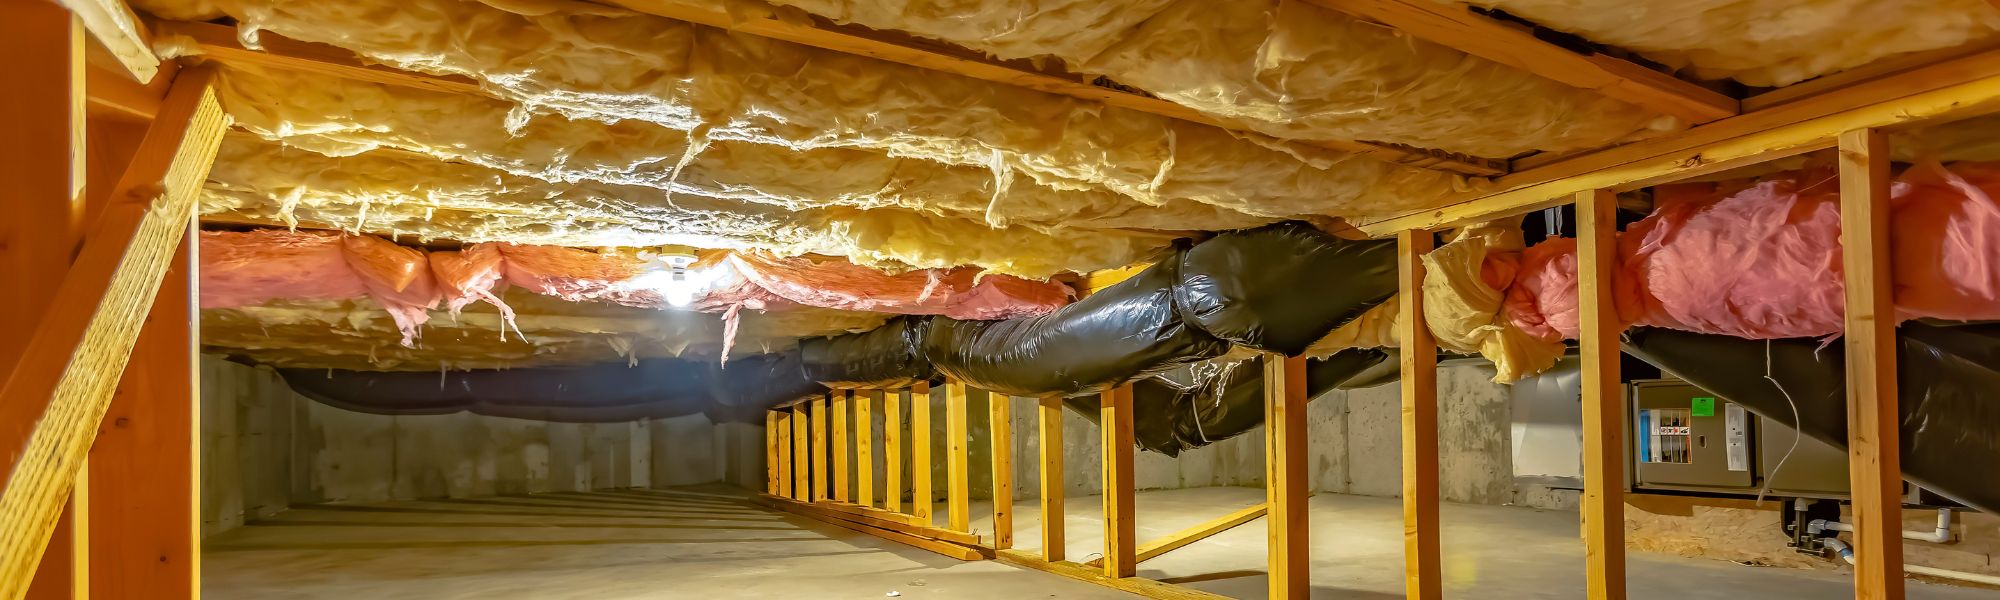 Crawl Space Insulation For the Home